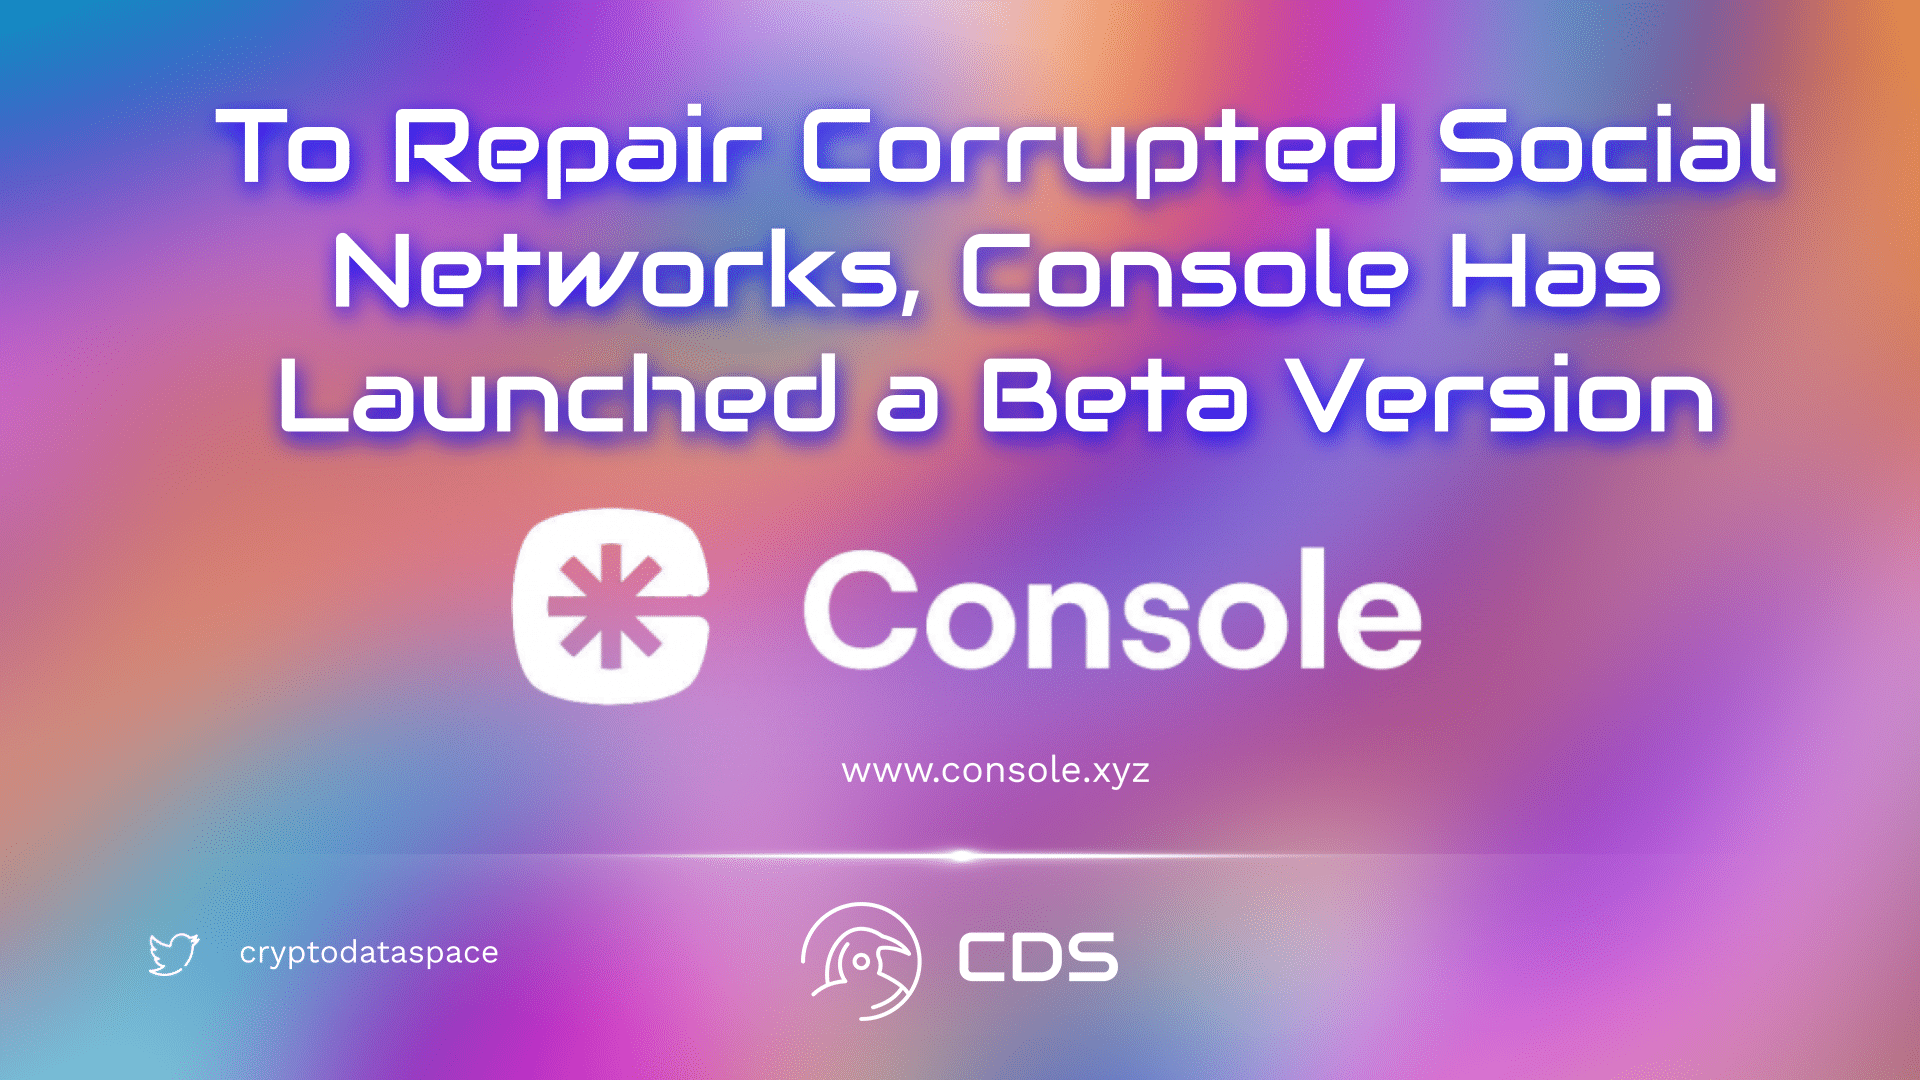 To Repair Corrupted Social Networks, Console Has Launched a Beta Version